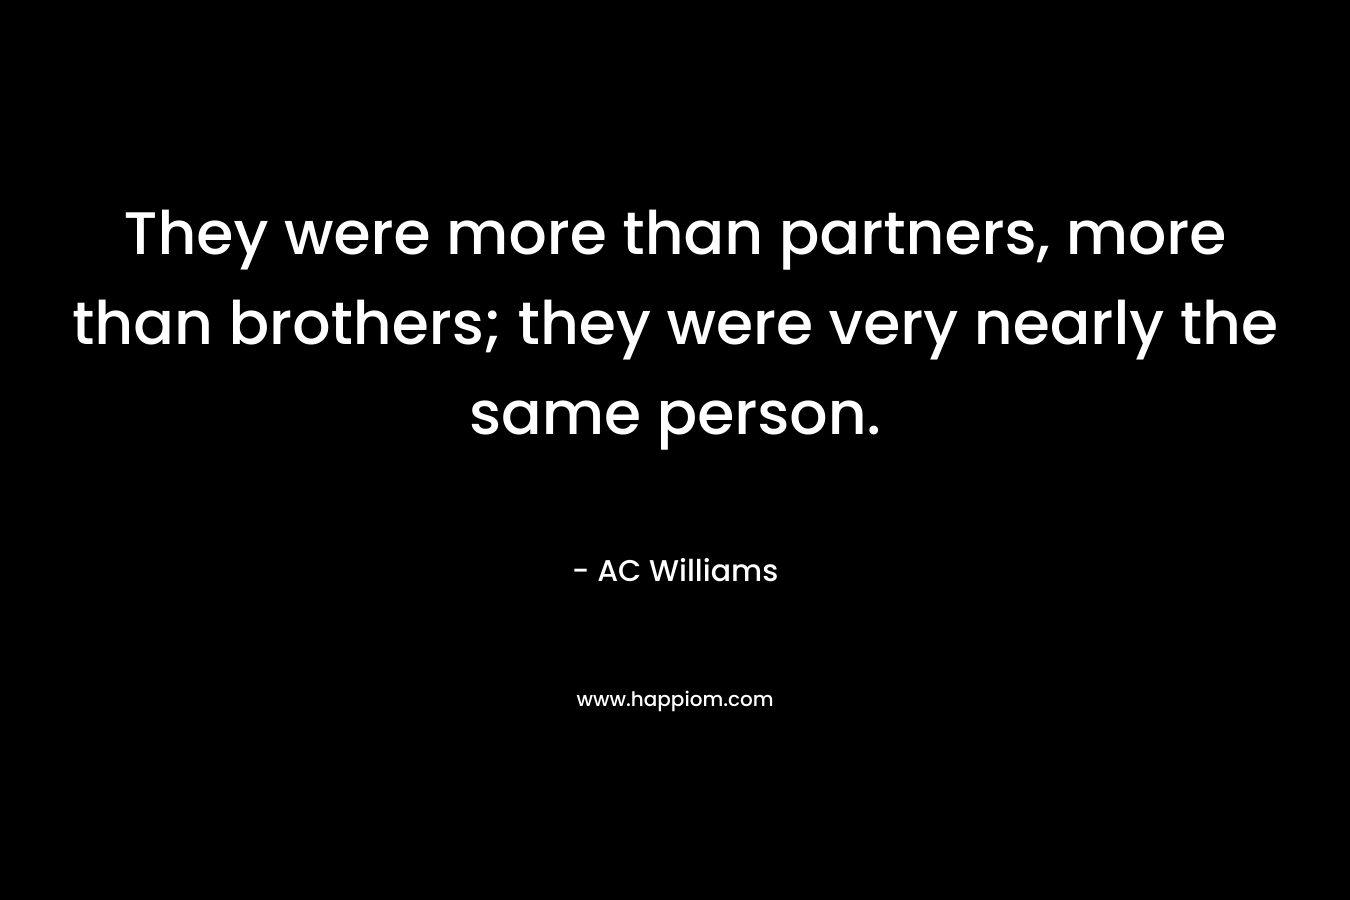 They were more than partners, more than brothers; they were very nearly the same person. – AC Williams